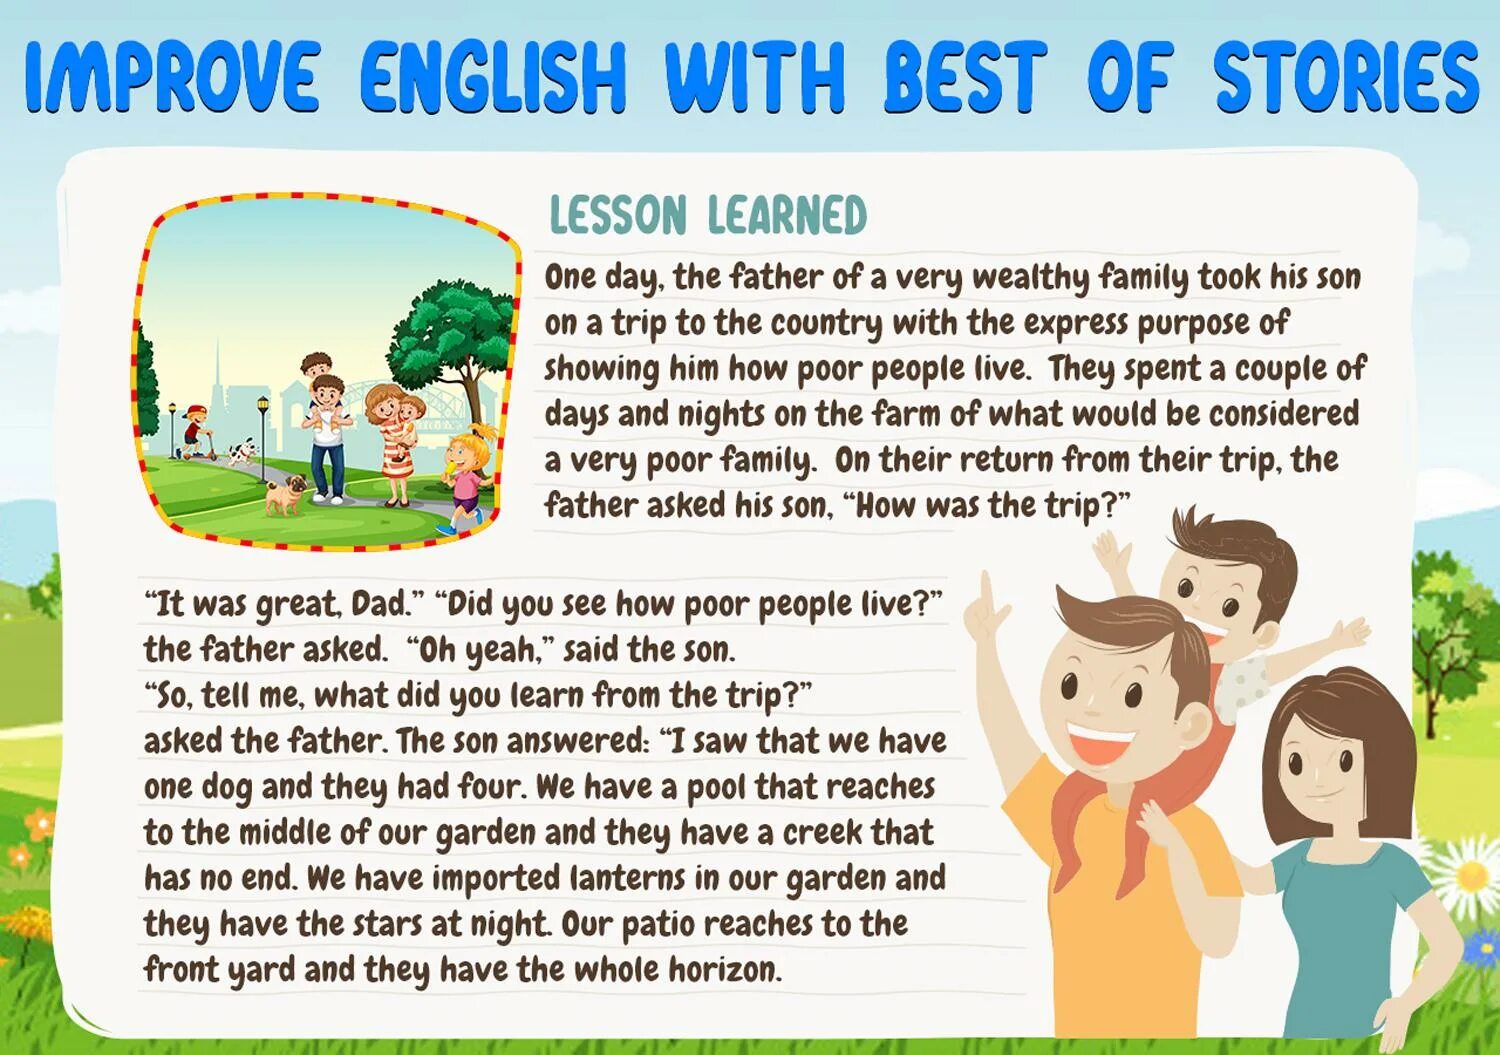 Text to learning english. Short stories in English. Short stories for Kids. Stories for children in English. Topics in English книга.